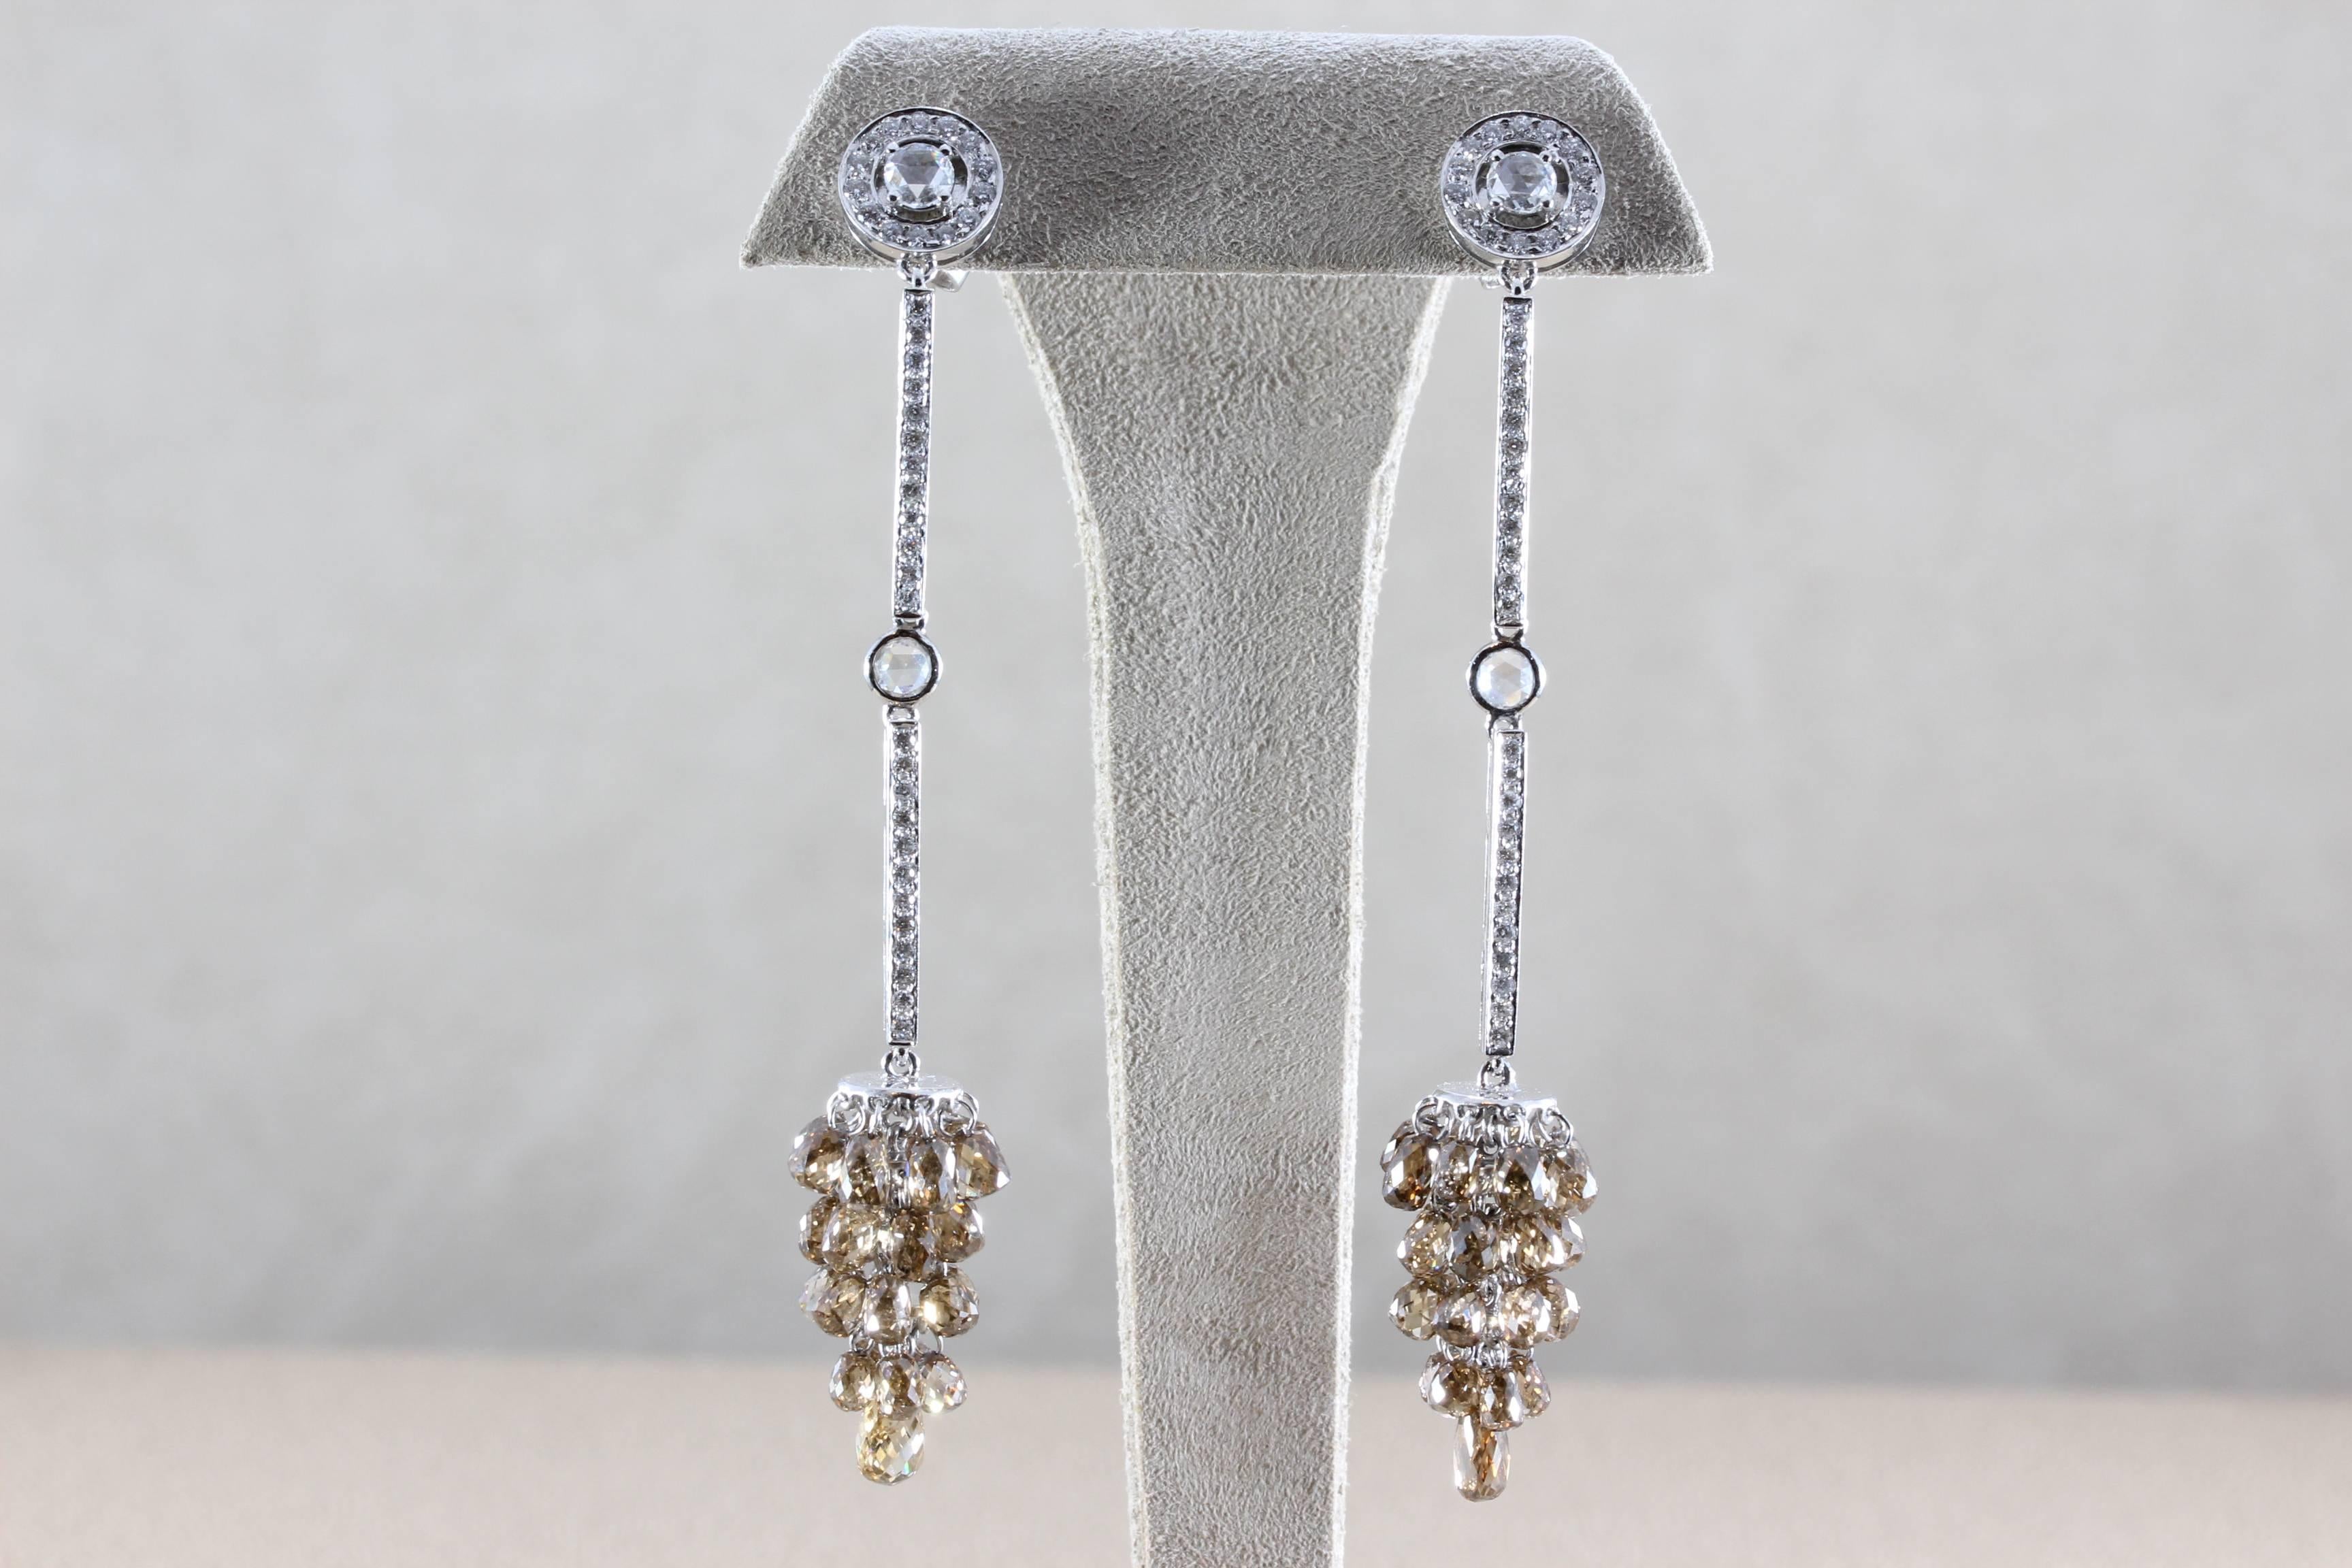 A fun and sexy pair of chandelier earrings featuring 22.03 carats of fancy colored briolette cut diamonds. Accenting the chandelier are 1.66 carats of white diamonds, set in 18K white gold. 

Length: 3 inch
Total Weight:15.5 grams
